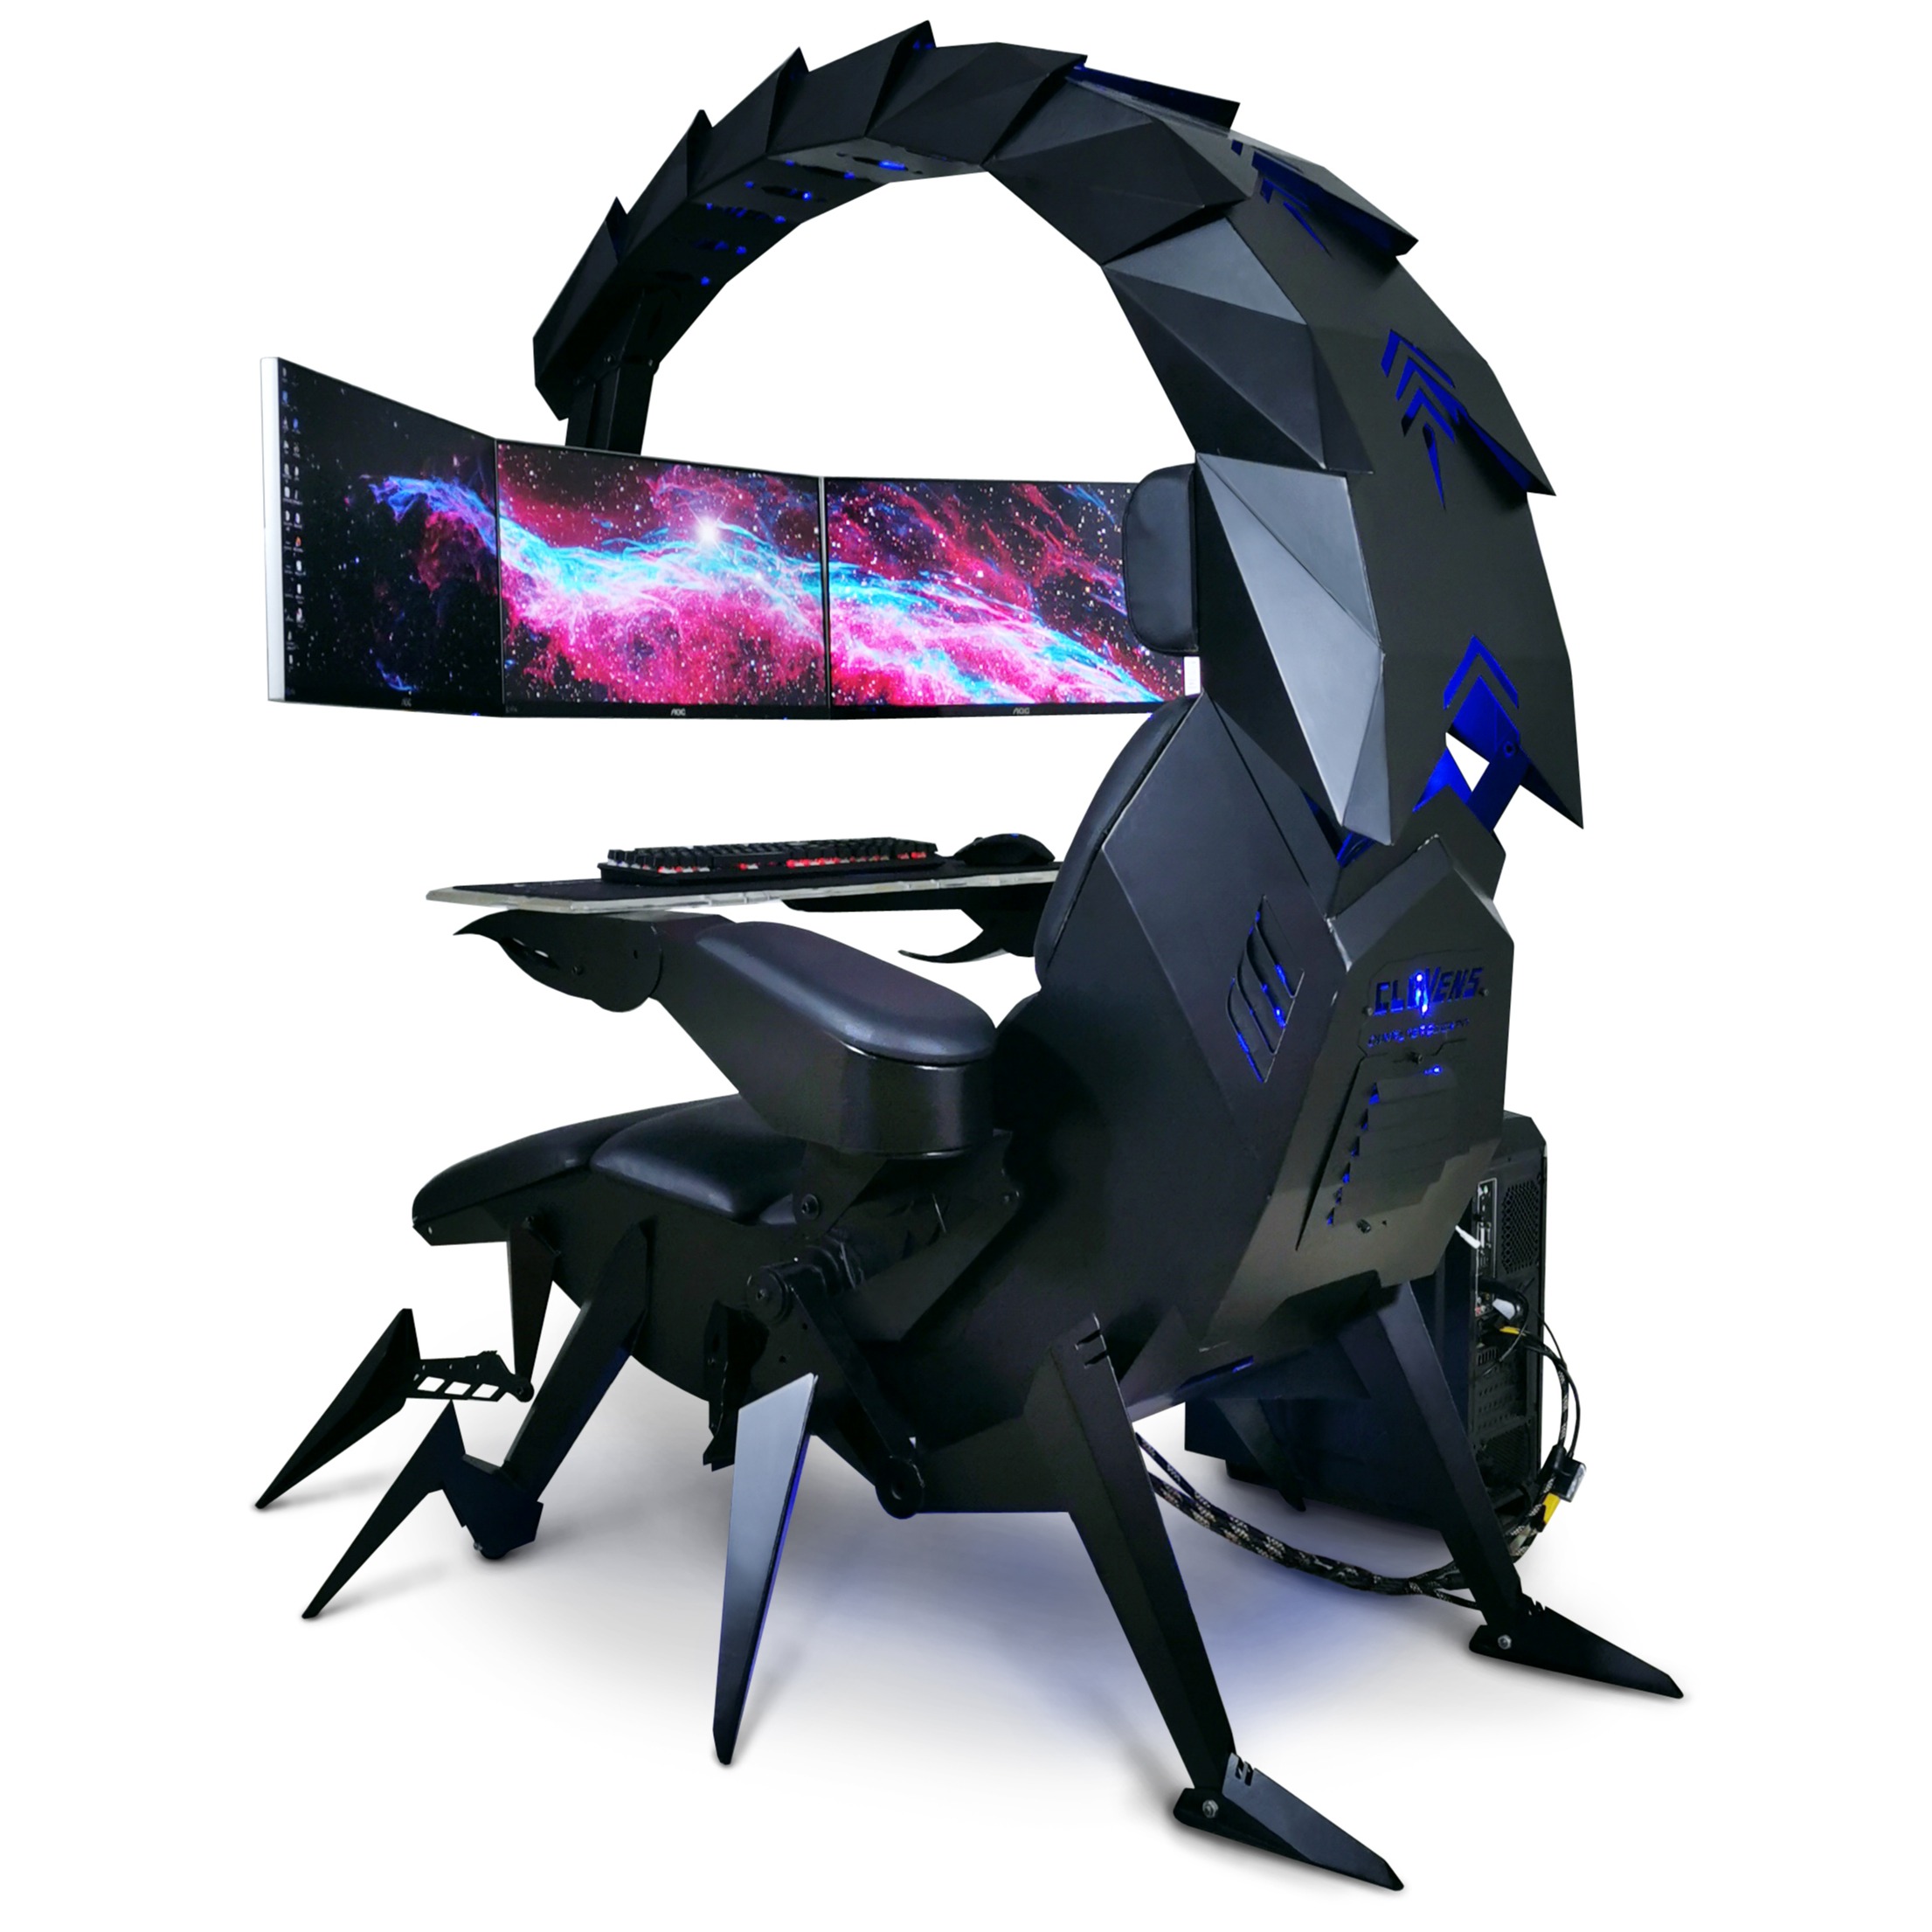 CLUVENS SK Scorpion gaming chair cockpit computer workstation support upto 5 monitors electrical recline zero gravity to flat ergonomic design super cool design